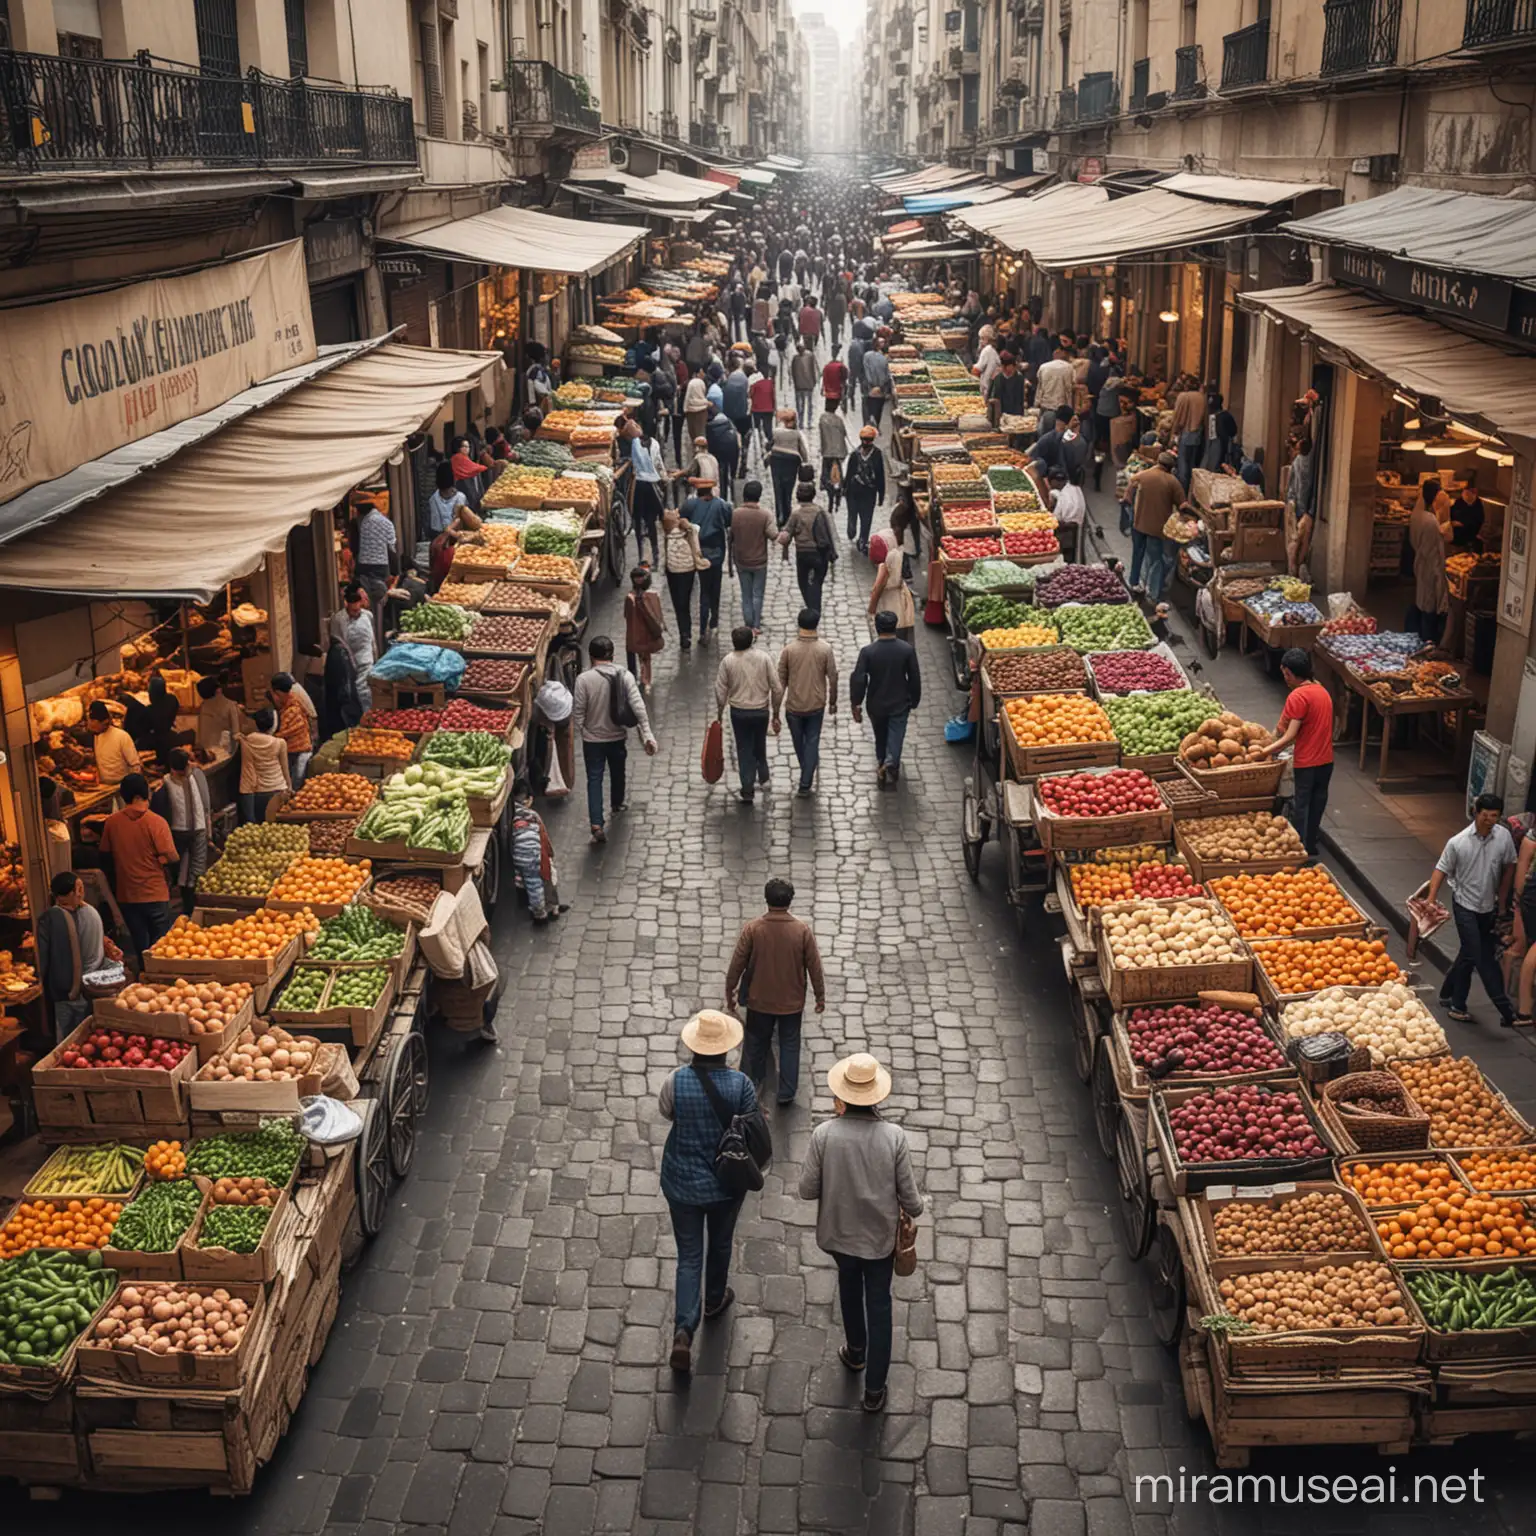 create an image of Global market, busy, street vendors

